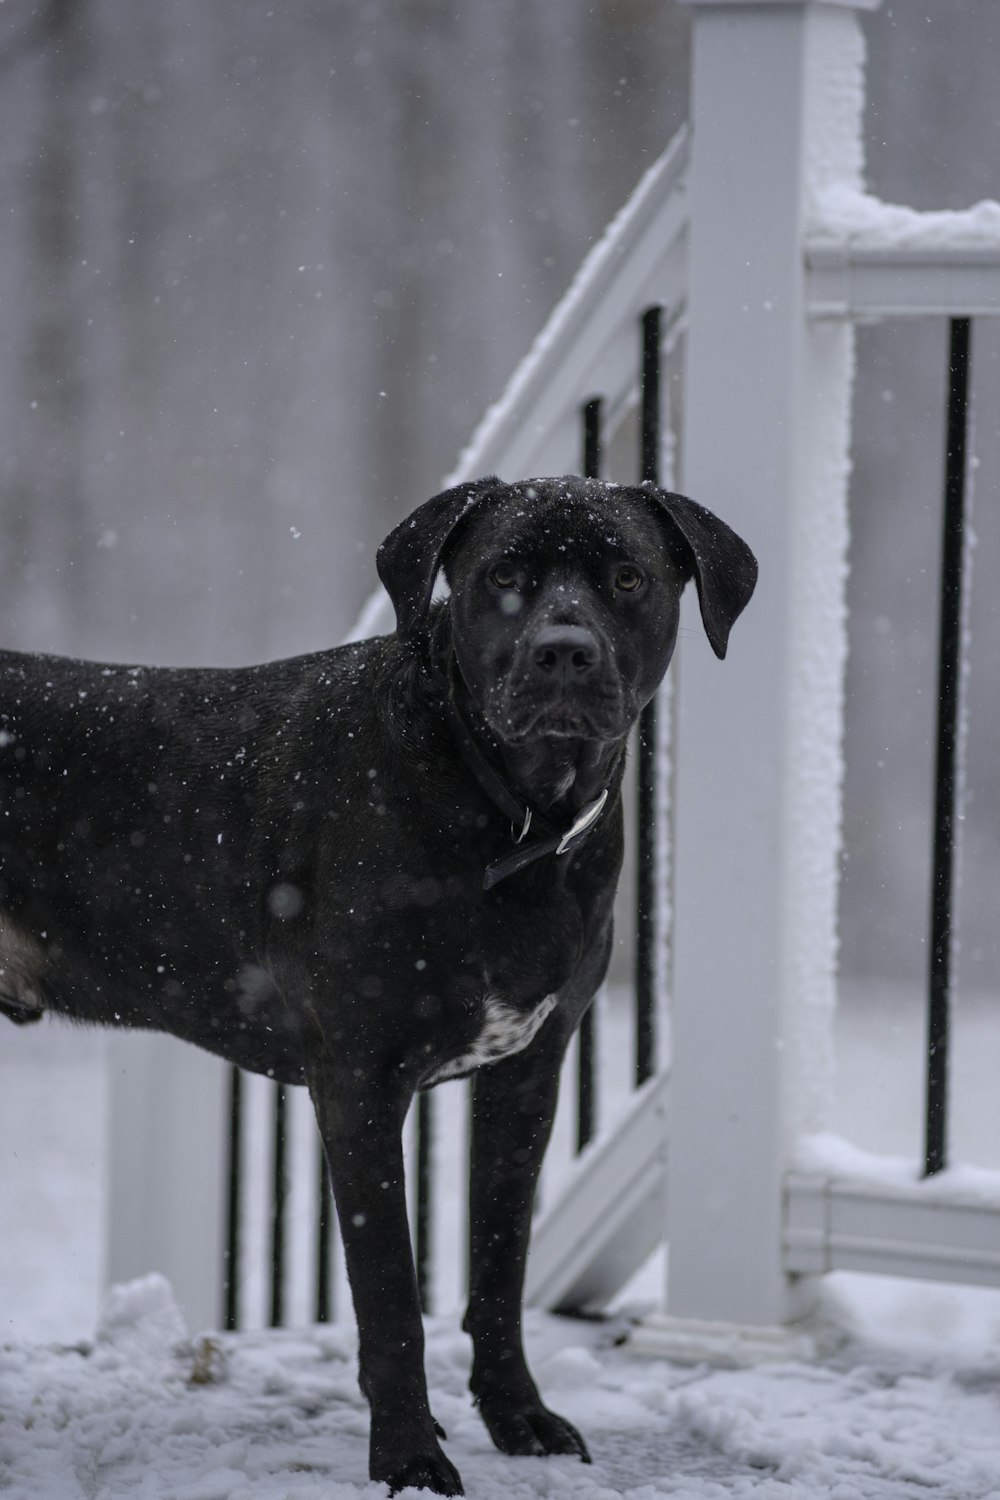 a black dog standing on a snow covered porch